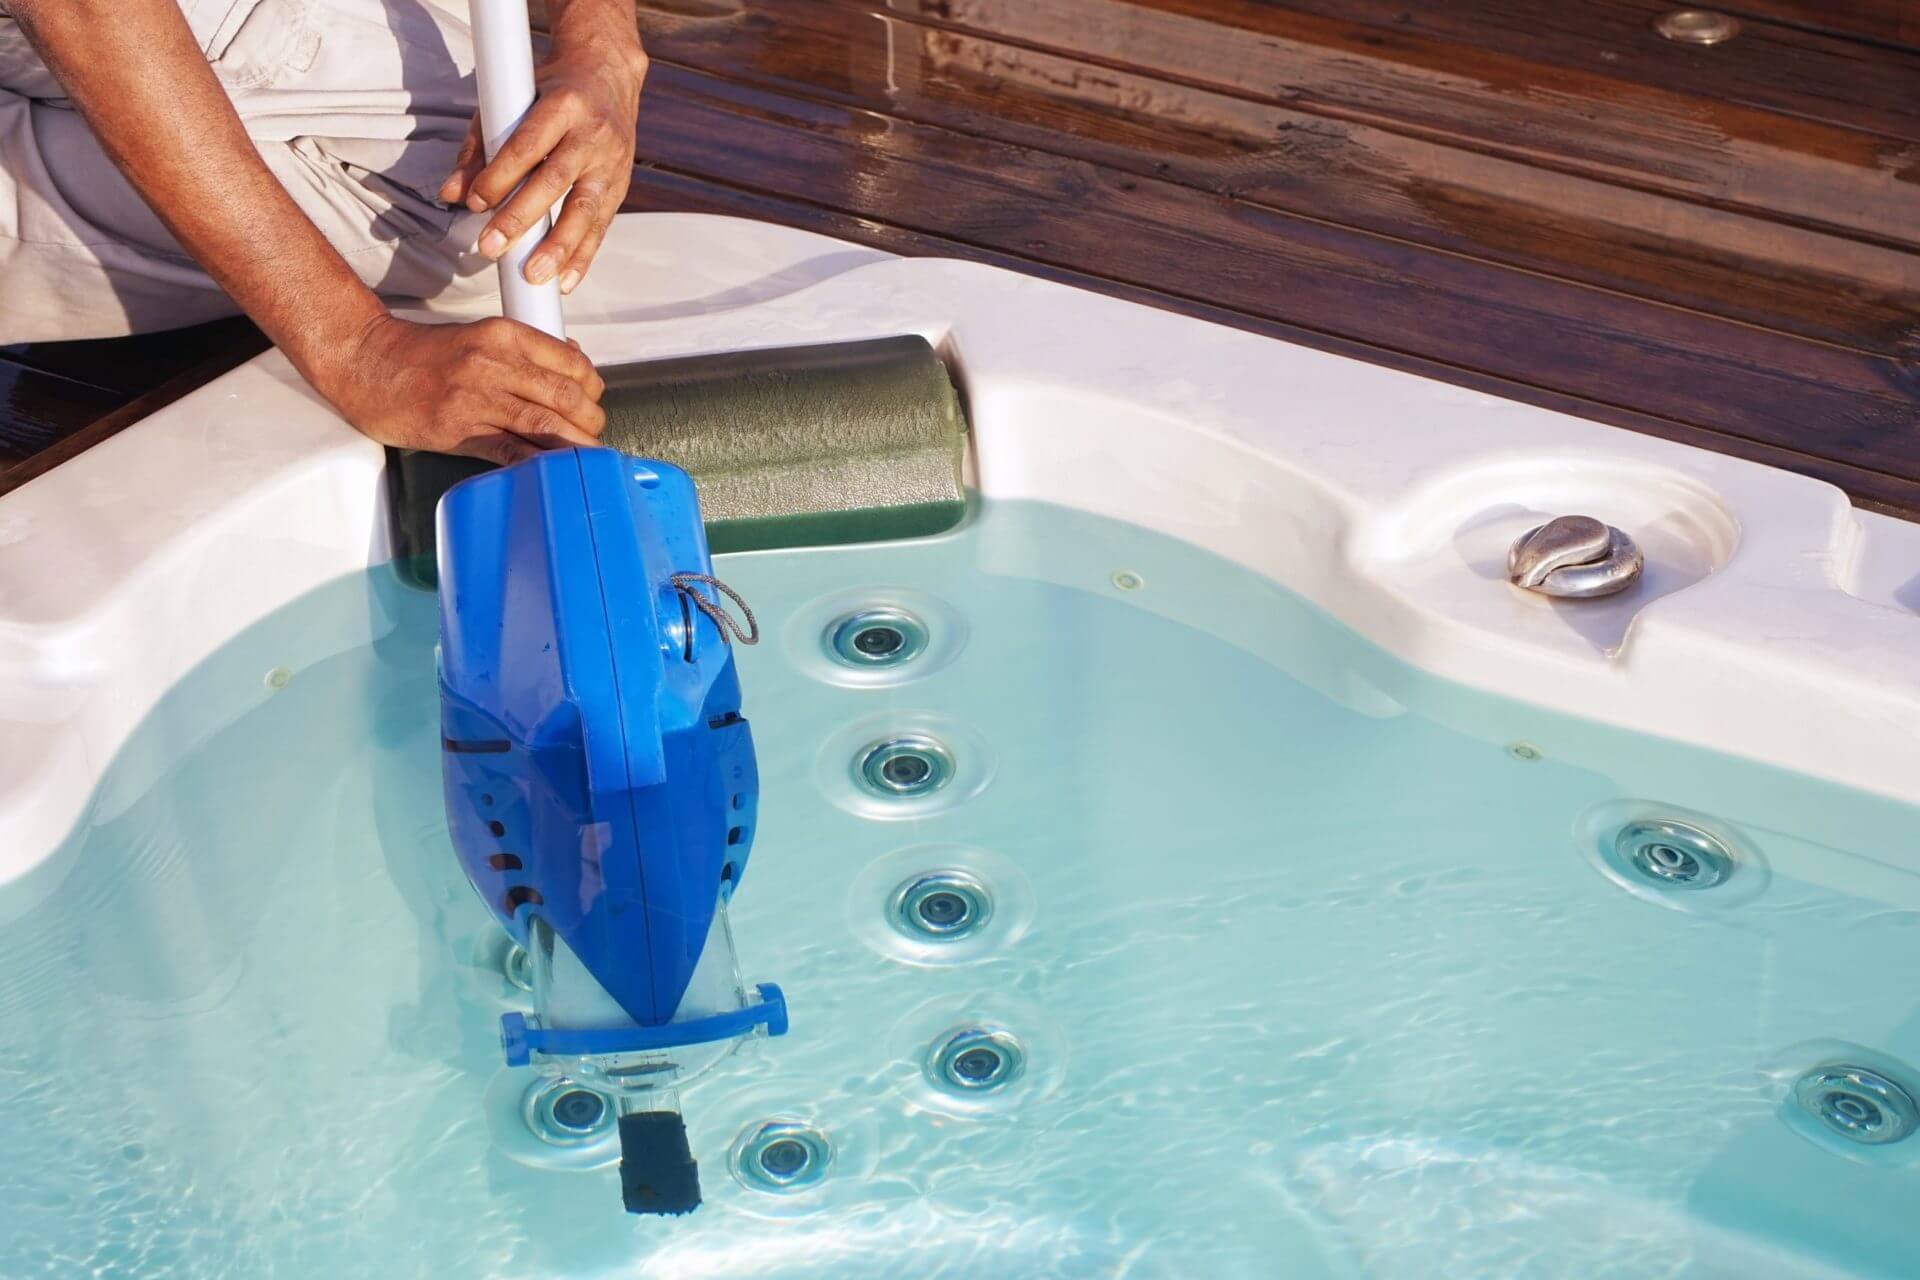 How To Clean A Hot Tub Without Draining It